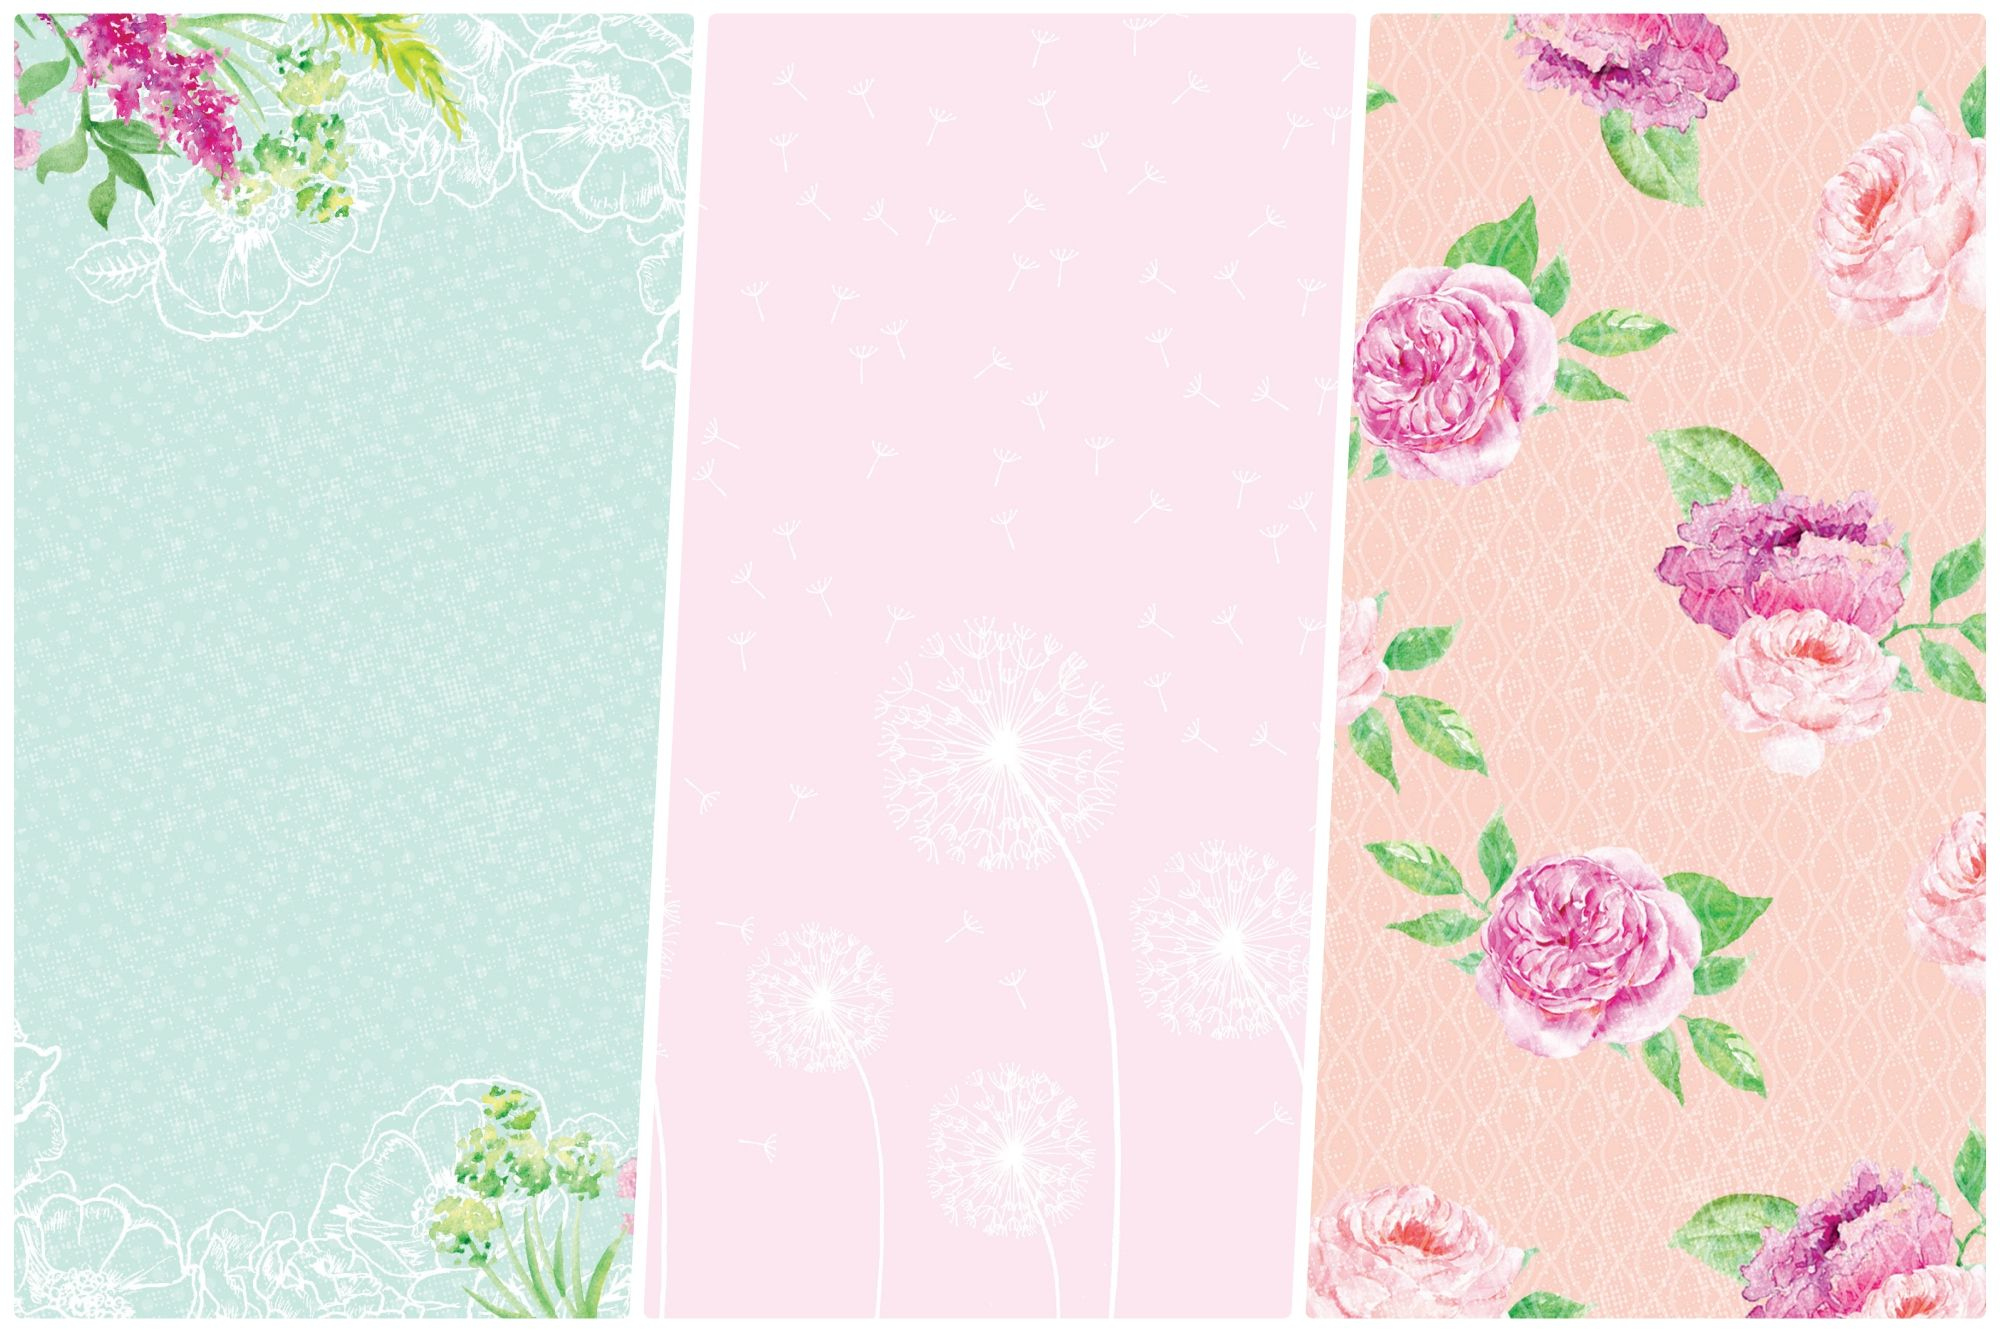 105 Free Printable Papers inside Free Printable Background Designs